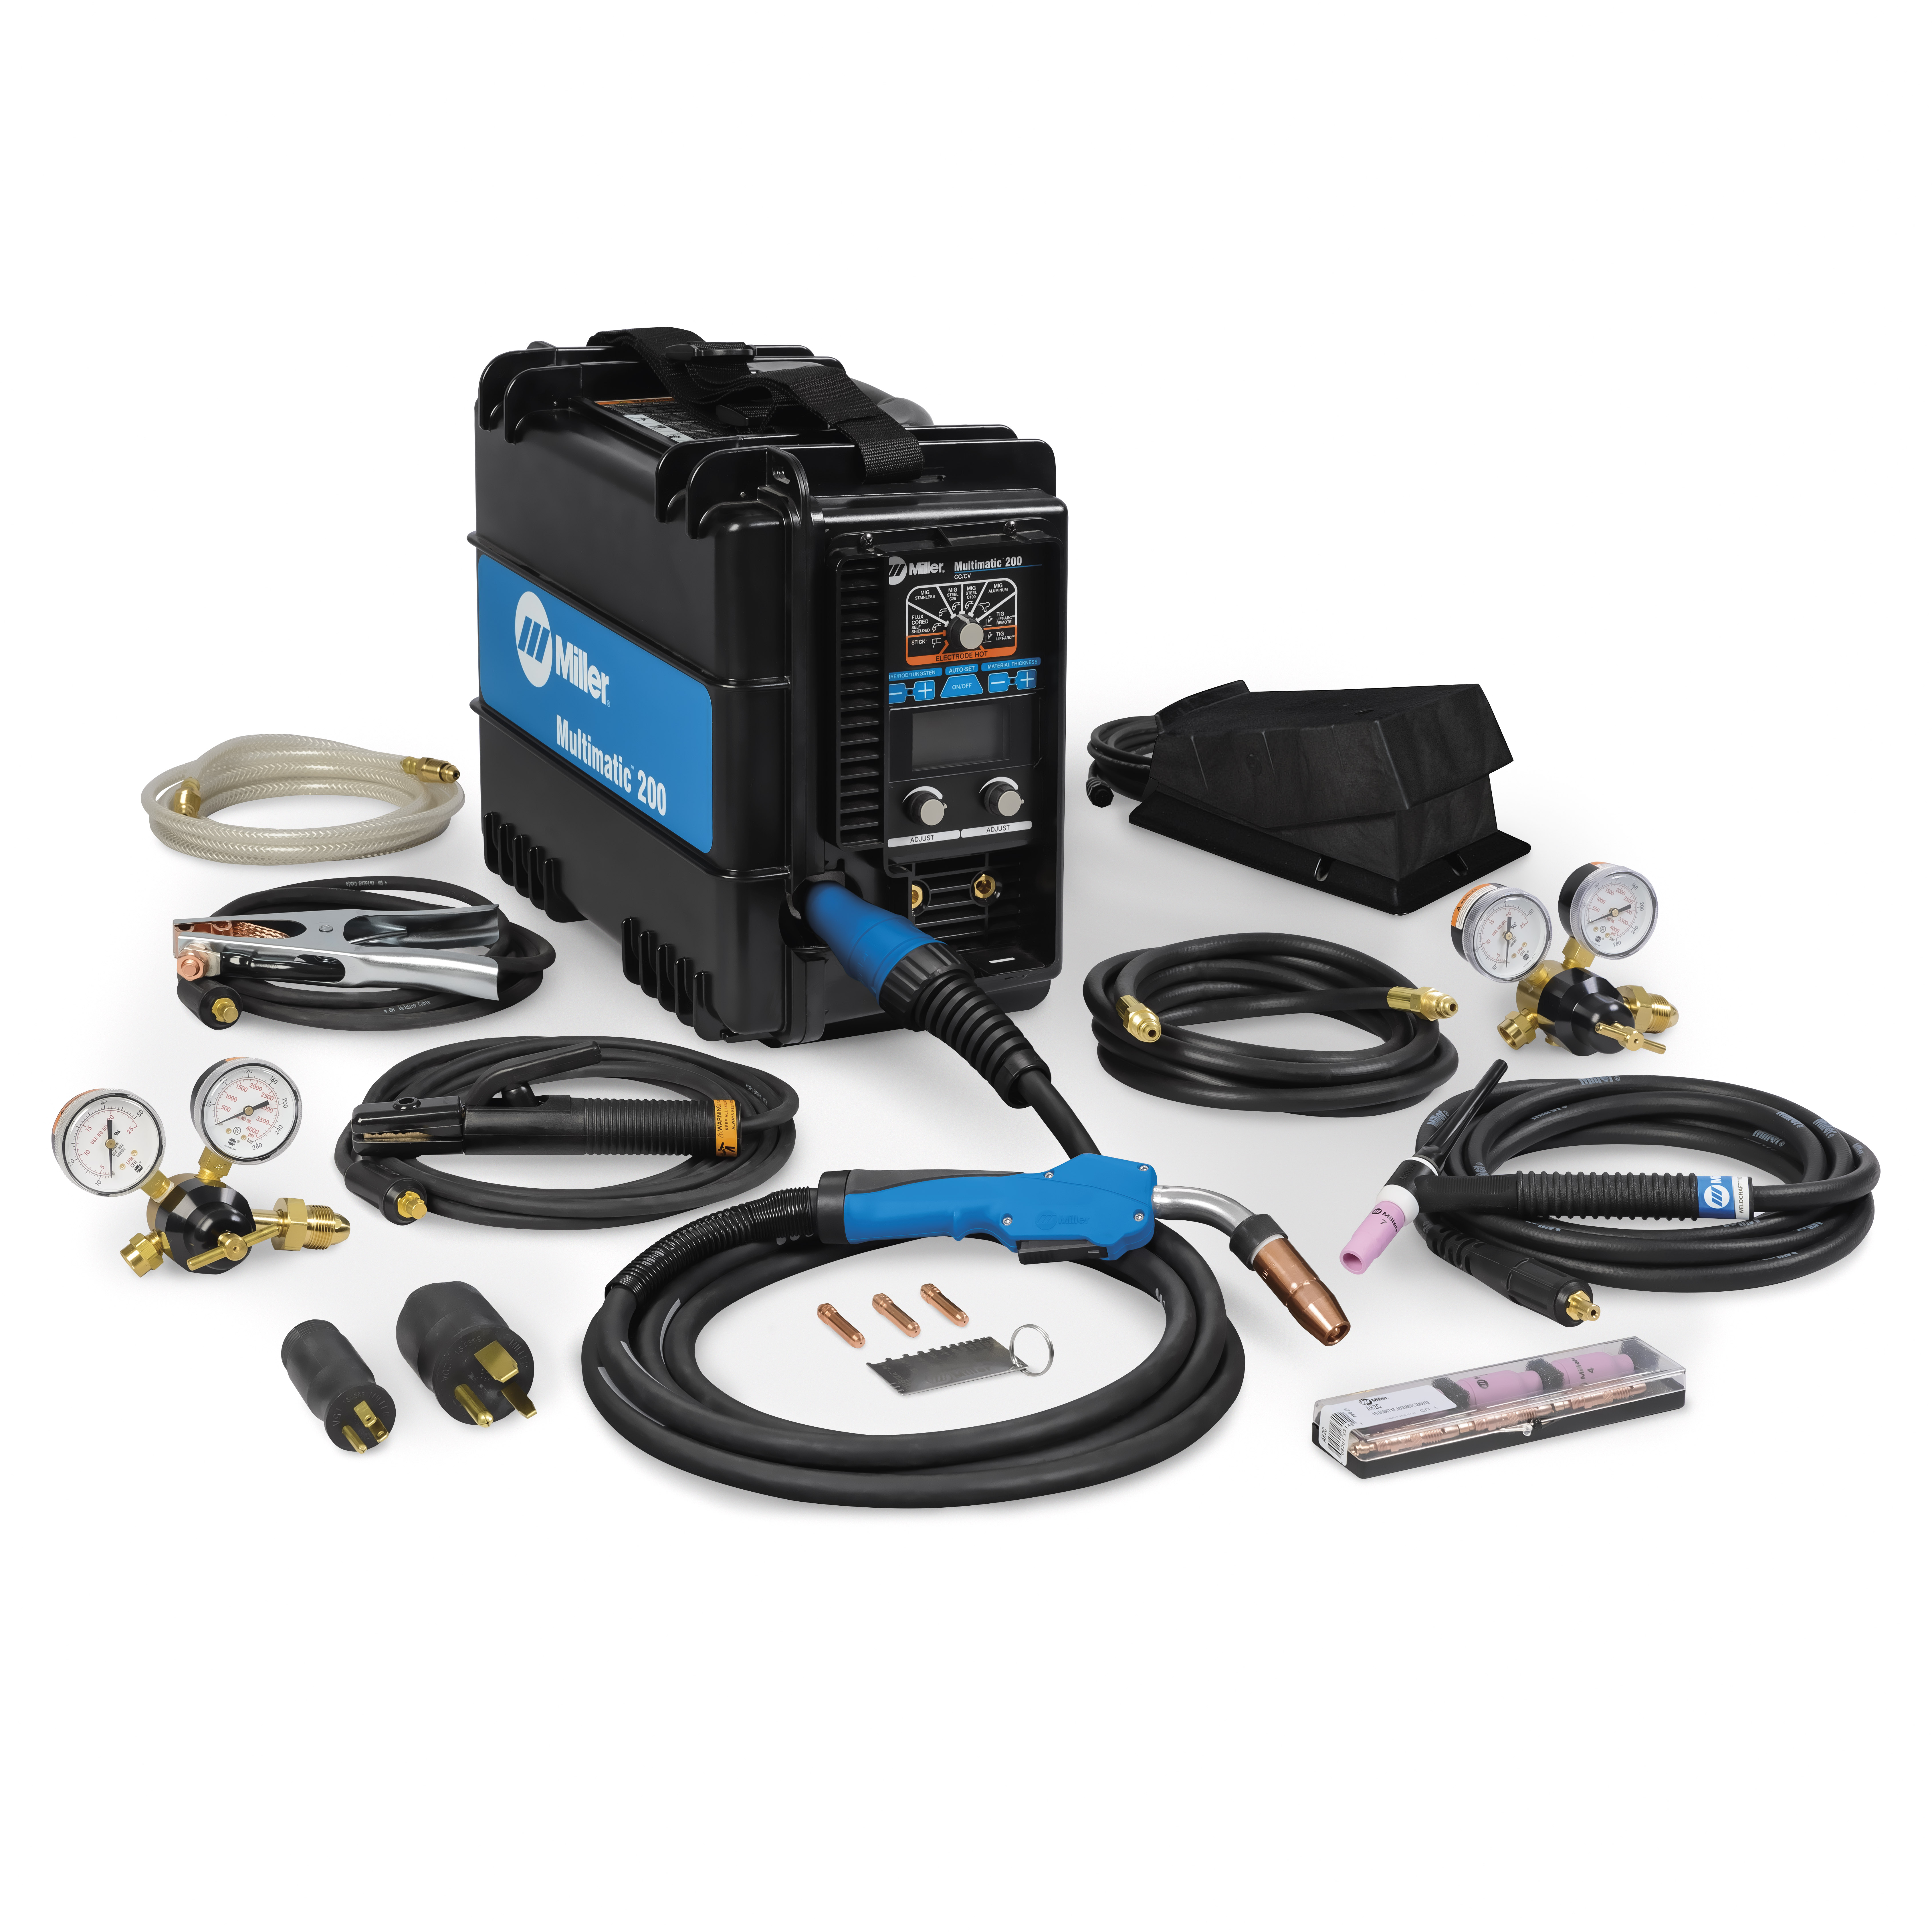 Multimatic 200 MIG Welder with TIG Kit